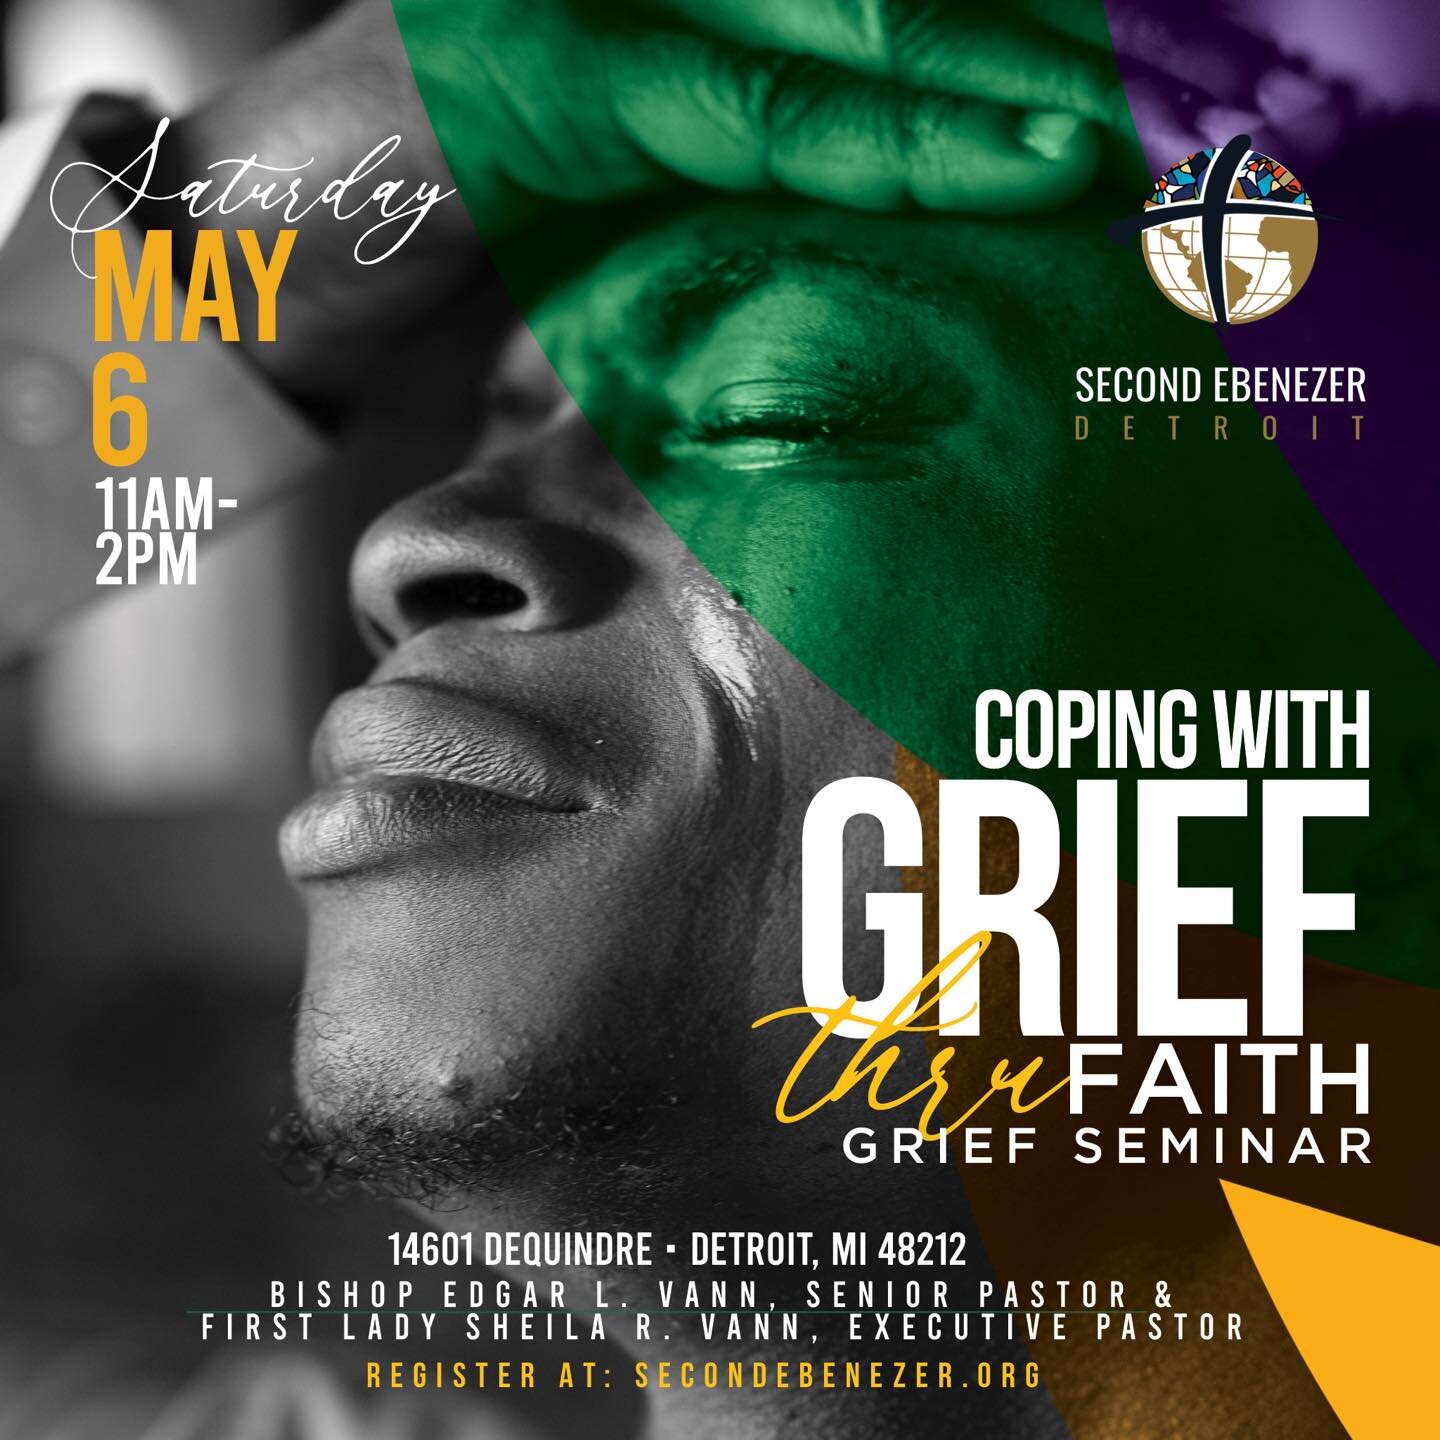 You matter to us, and that's why we've designed the Second Ebenezer Grief Seminar just for you. We understand that dealing with grief can be difficult, but we're here to help. Join us on May 6th at 11am for this important seminar. #SecondEbenezer #Gr